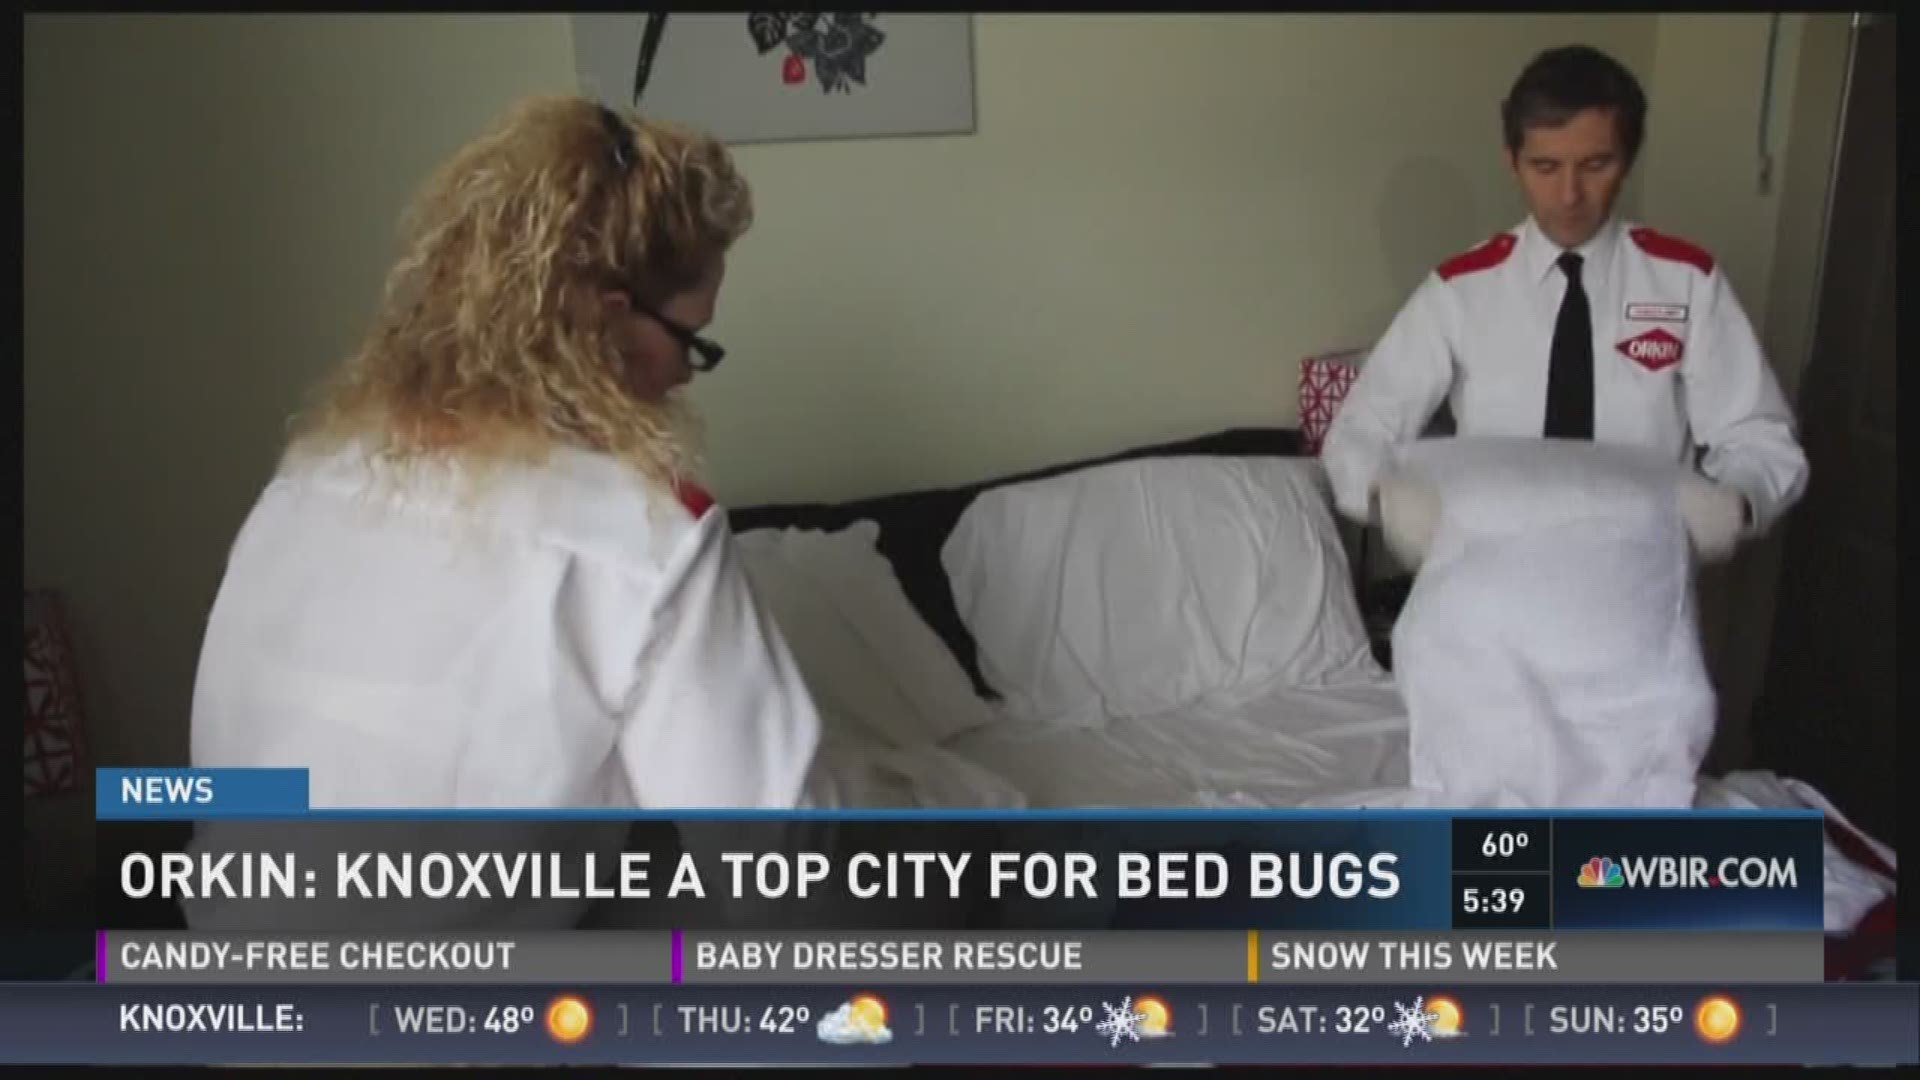 Jan. 3, 2017: Pest control company Orkin says Knoxville is once again a top city for bedbugs.